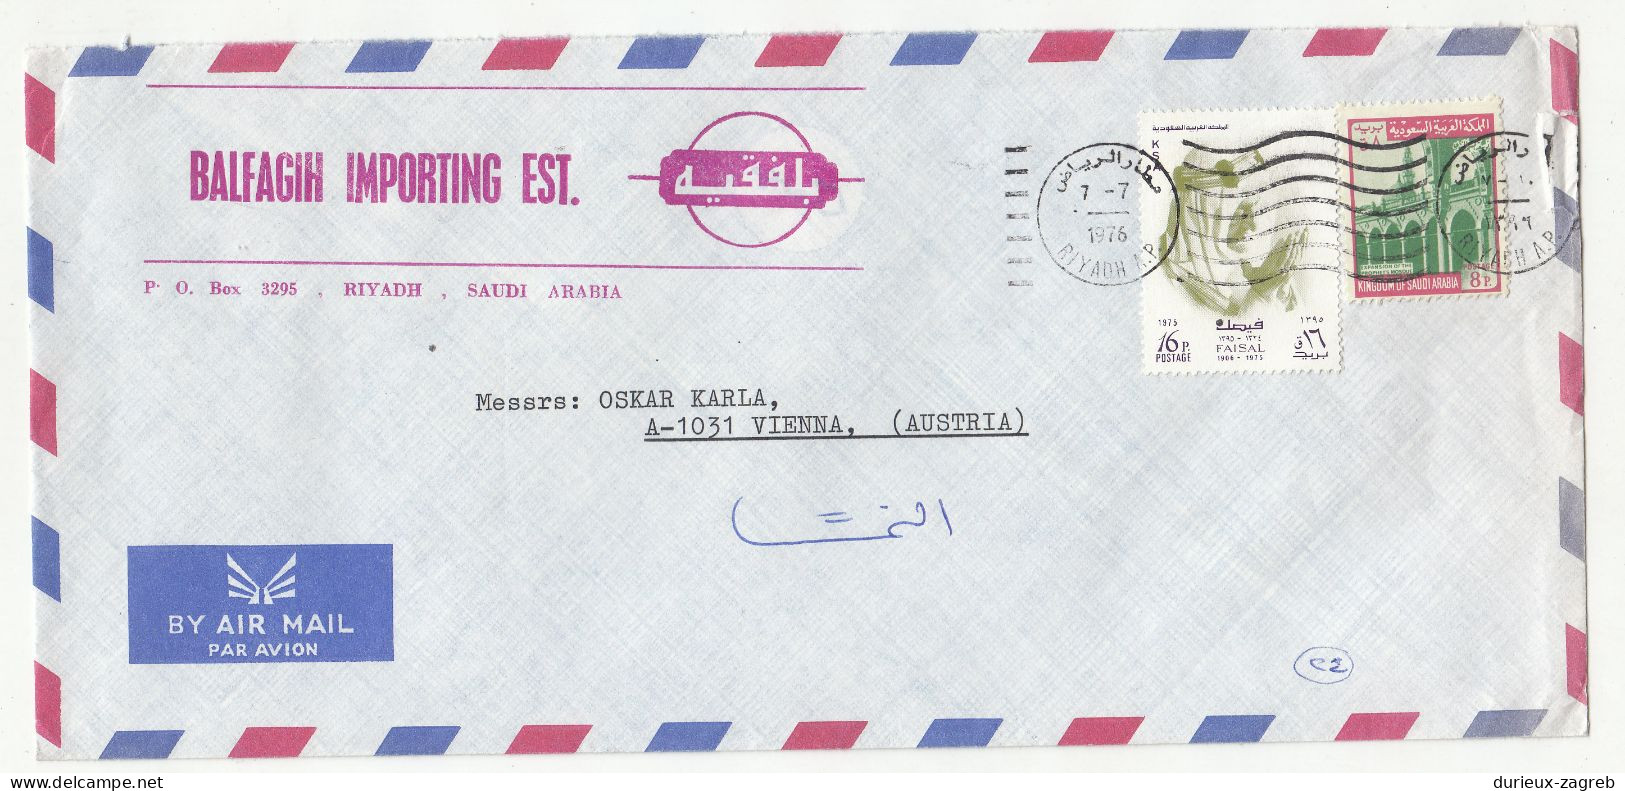 Balfagih Importing Est, Riyadh Company Air Mail Letter Cover Posted 1976 To Vienna B240401 - Arabie Saoudite